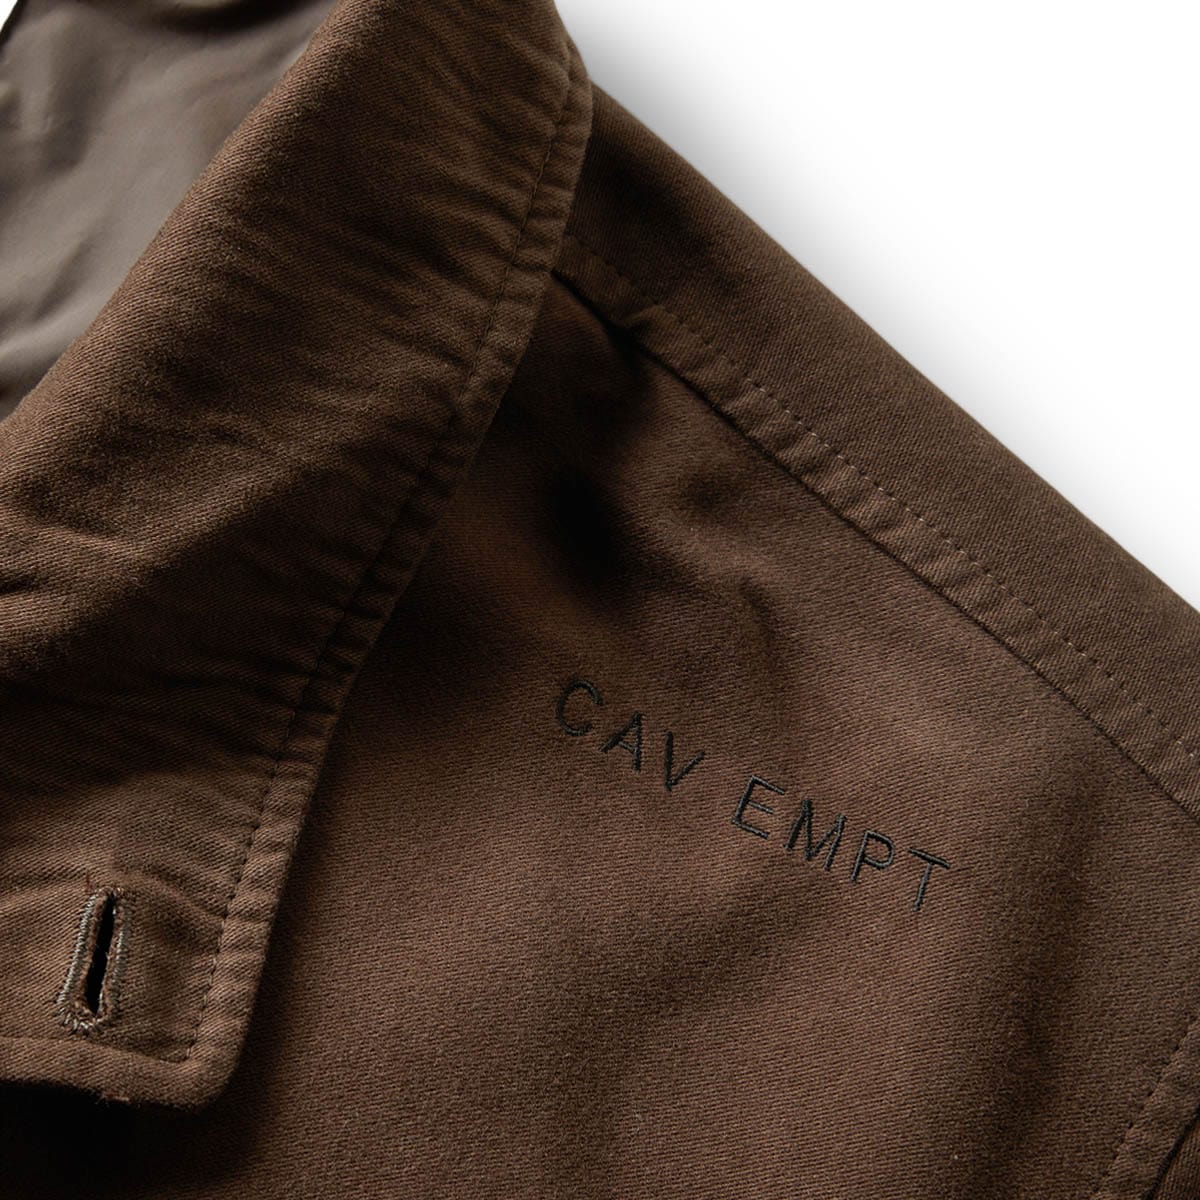 Cav Empt Outerwear BRUSHED COTTON BUTTON JACKET